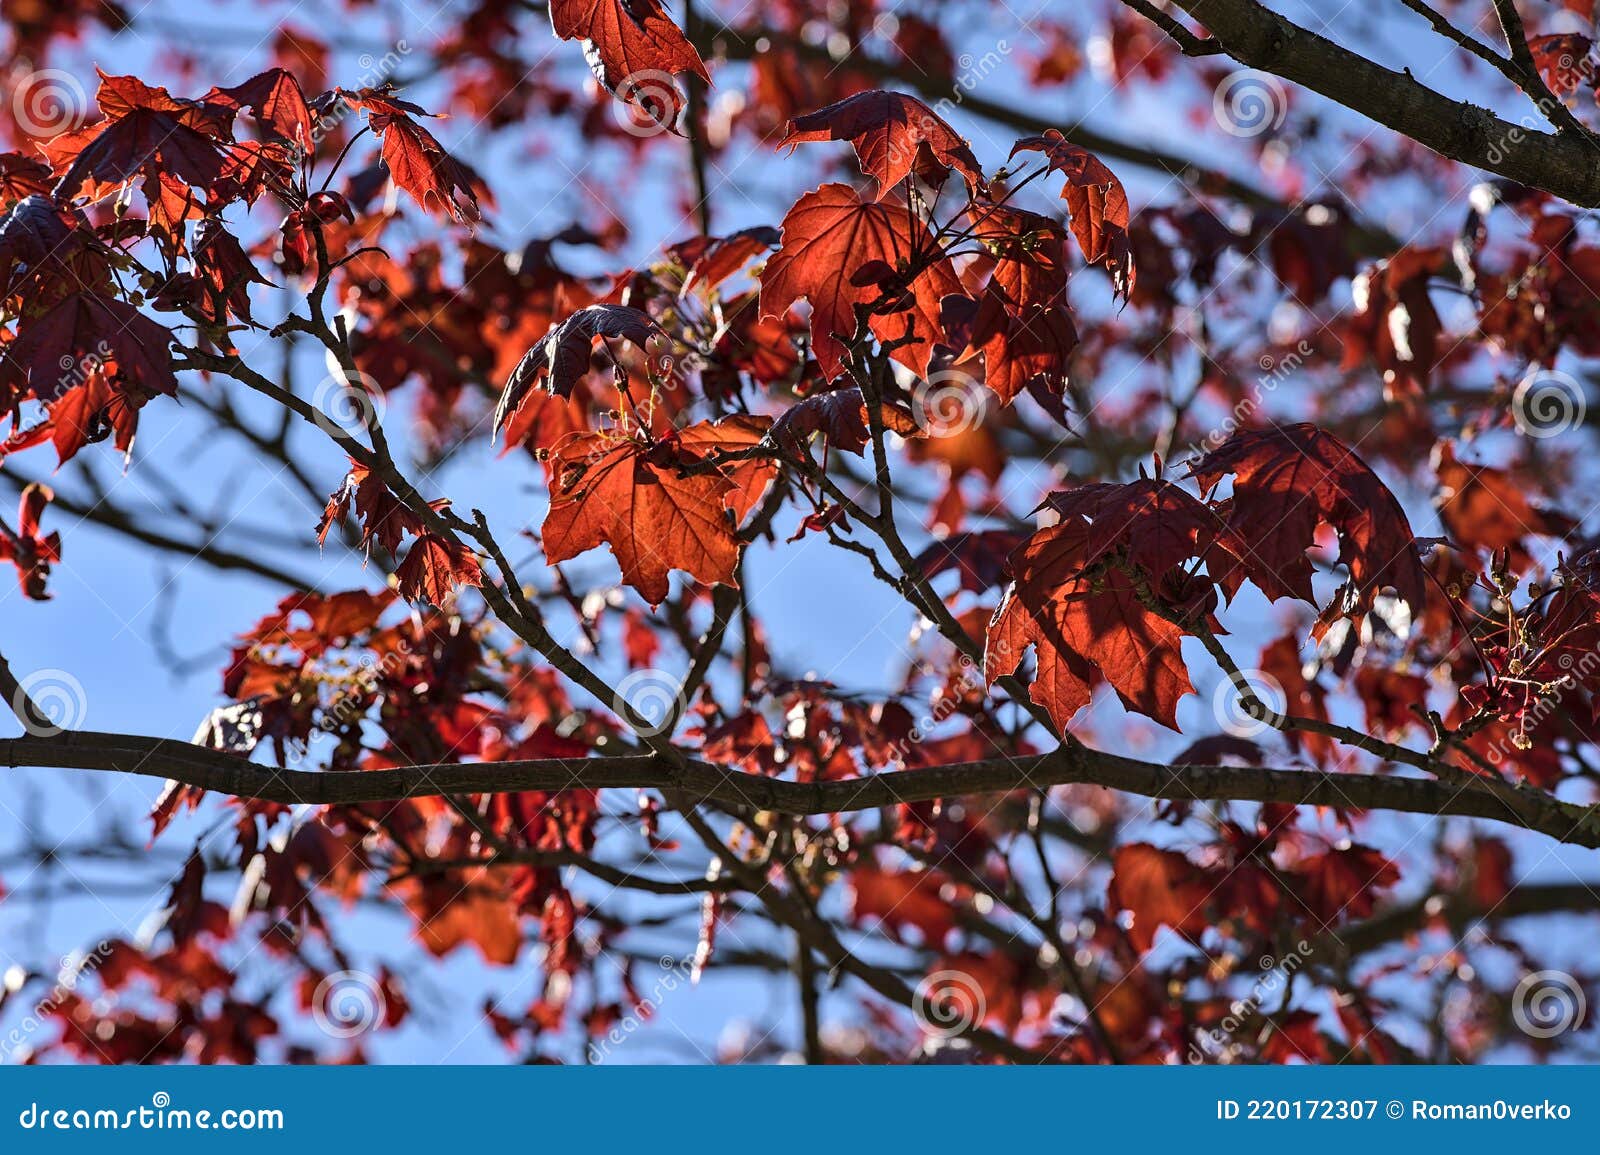 Beautiful Dark Red Last Year Autumn Leaves Of Crimson King Acer Platanoides Norway Maple Tree Against Blue Sky Stock Image Image Of Closeup Copy